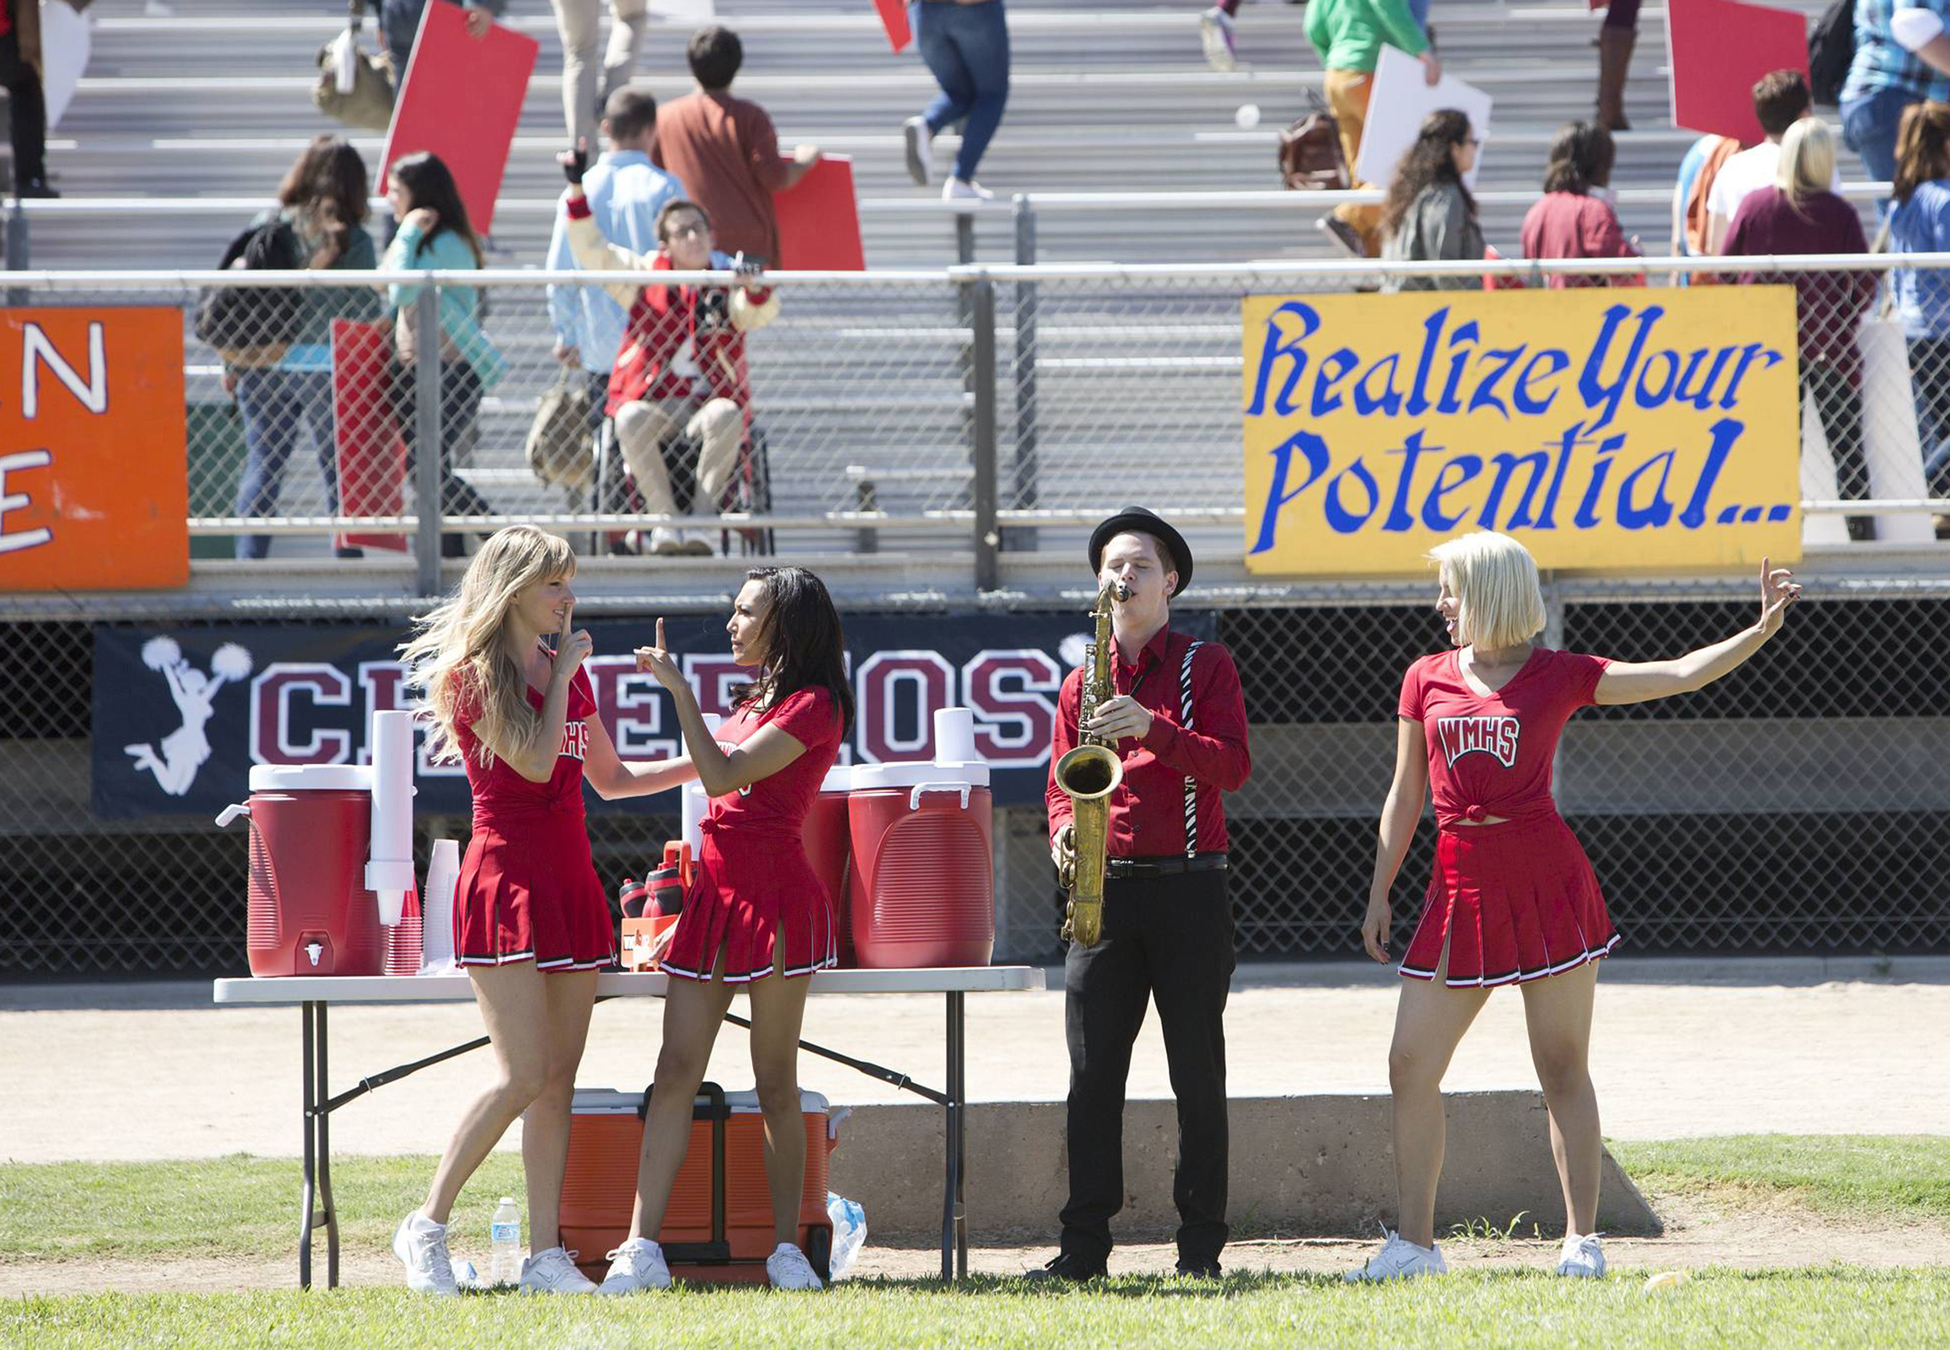 Still of Naya Rivera, Dianna Agron and Heather Morris in Glee (2009)